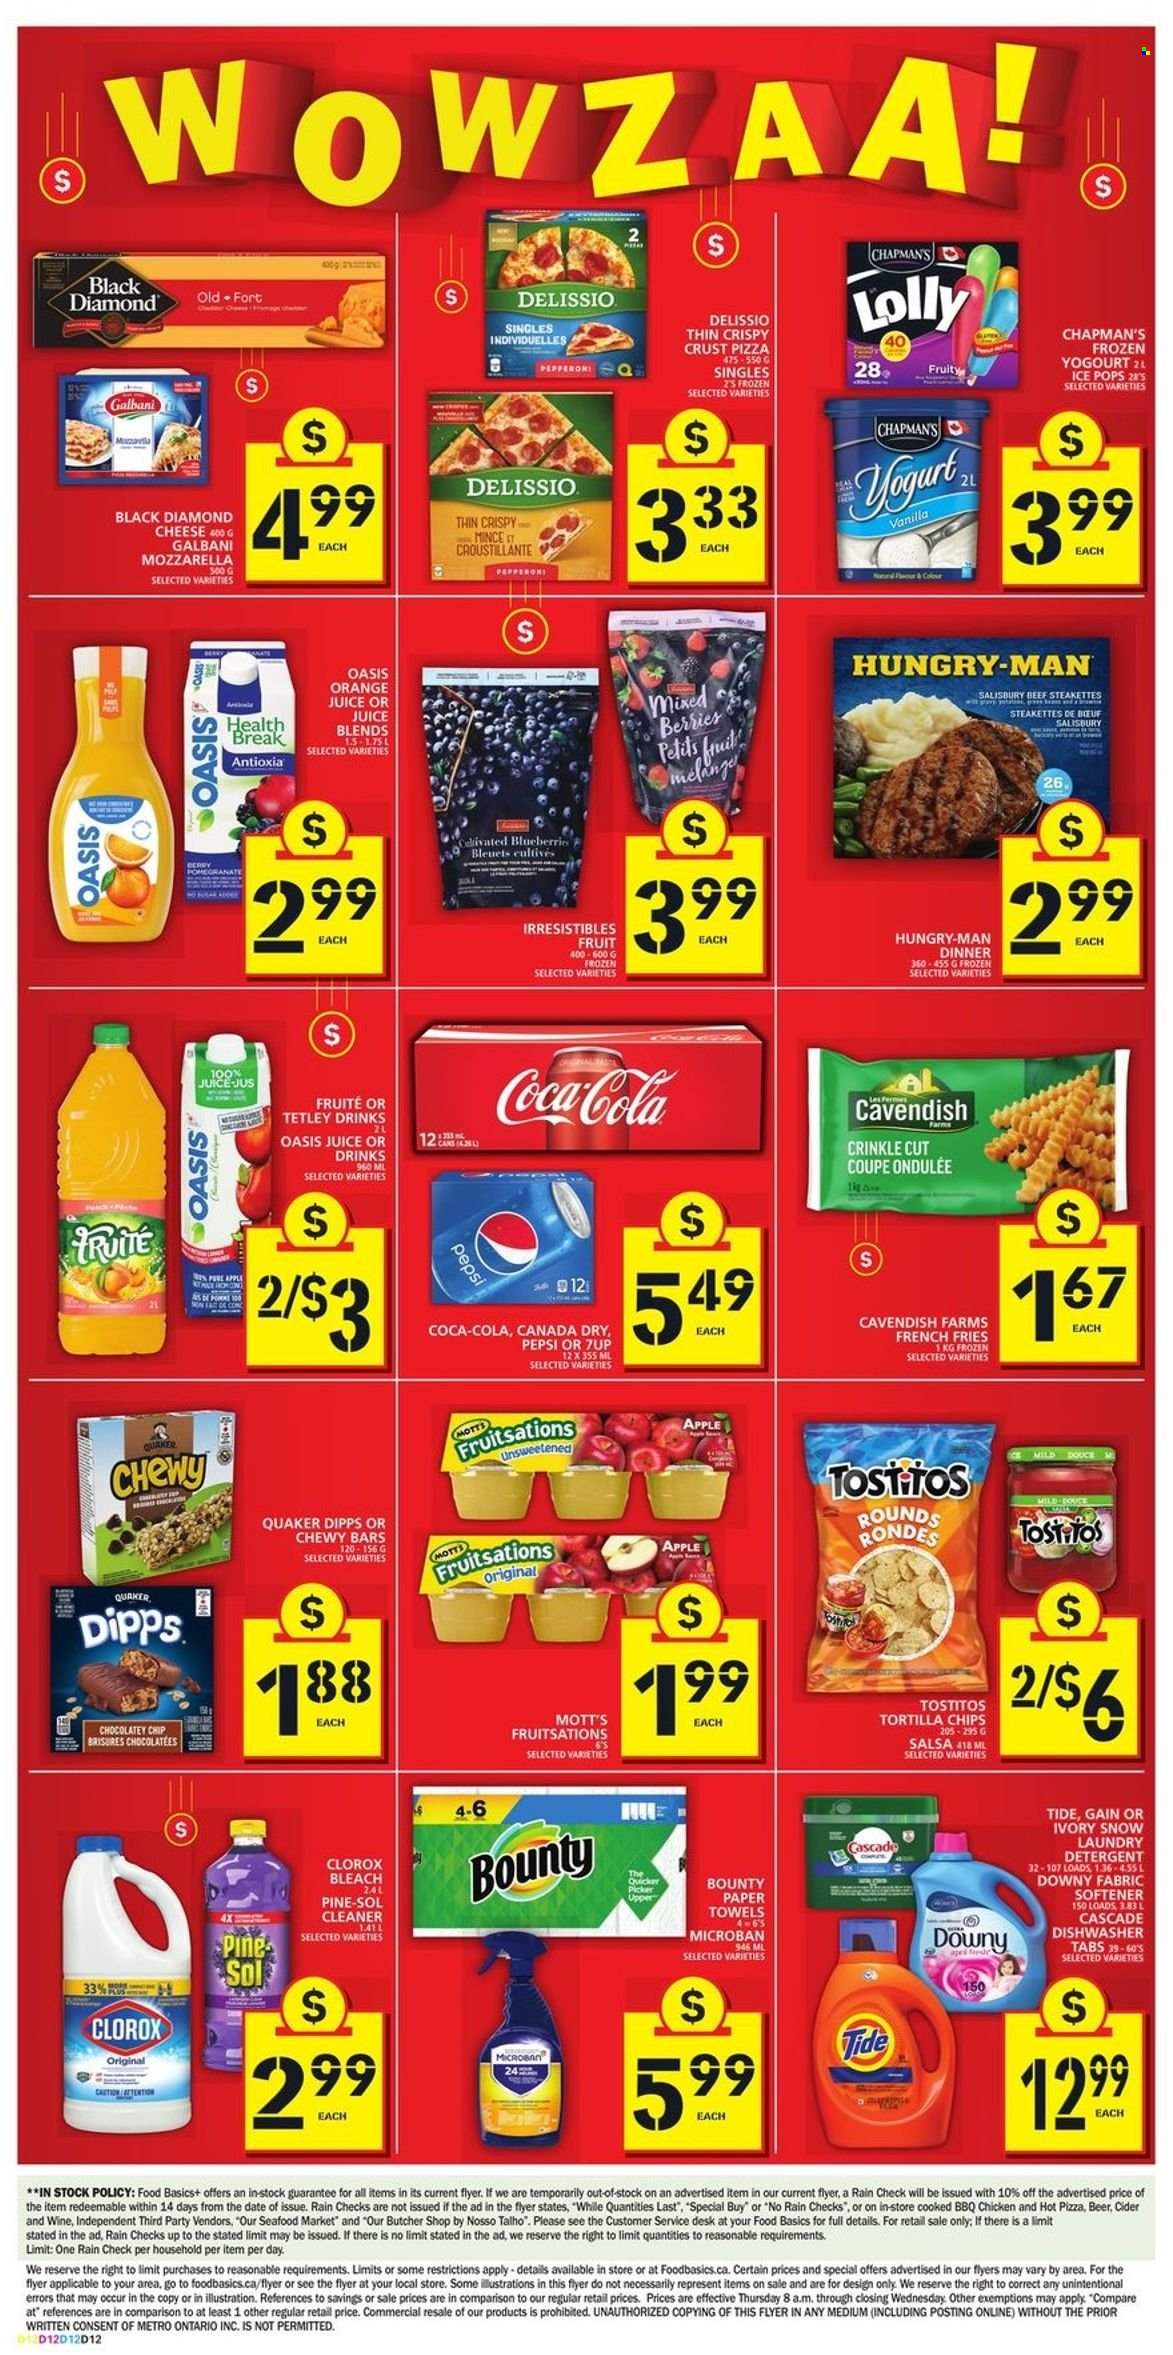 thumbnail - Food Basics Flyer - January 13, 2022 - January 19, 2022 - Sales products - Mott's, seafood, pizza, Quaker, pepperoni, Galbani, potato fries, french fries, Bounty, lollipop, tortilla chips, Tostitos, salsa, Canada Dry, Coca-Cola, Pepsi, orange juice, juice, wine, cider, beer, kitchen towels, paper towels, Gain, cleaner, bleach, Clorox, Pine-Sol, Tide, fabric softener, laundry detergent, Cascade, Downy Laundry, detergent. Page 6.